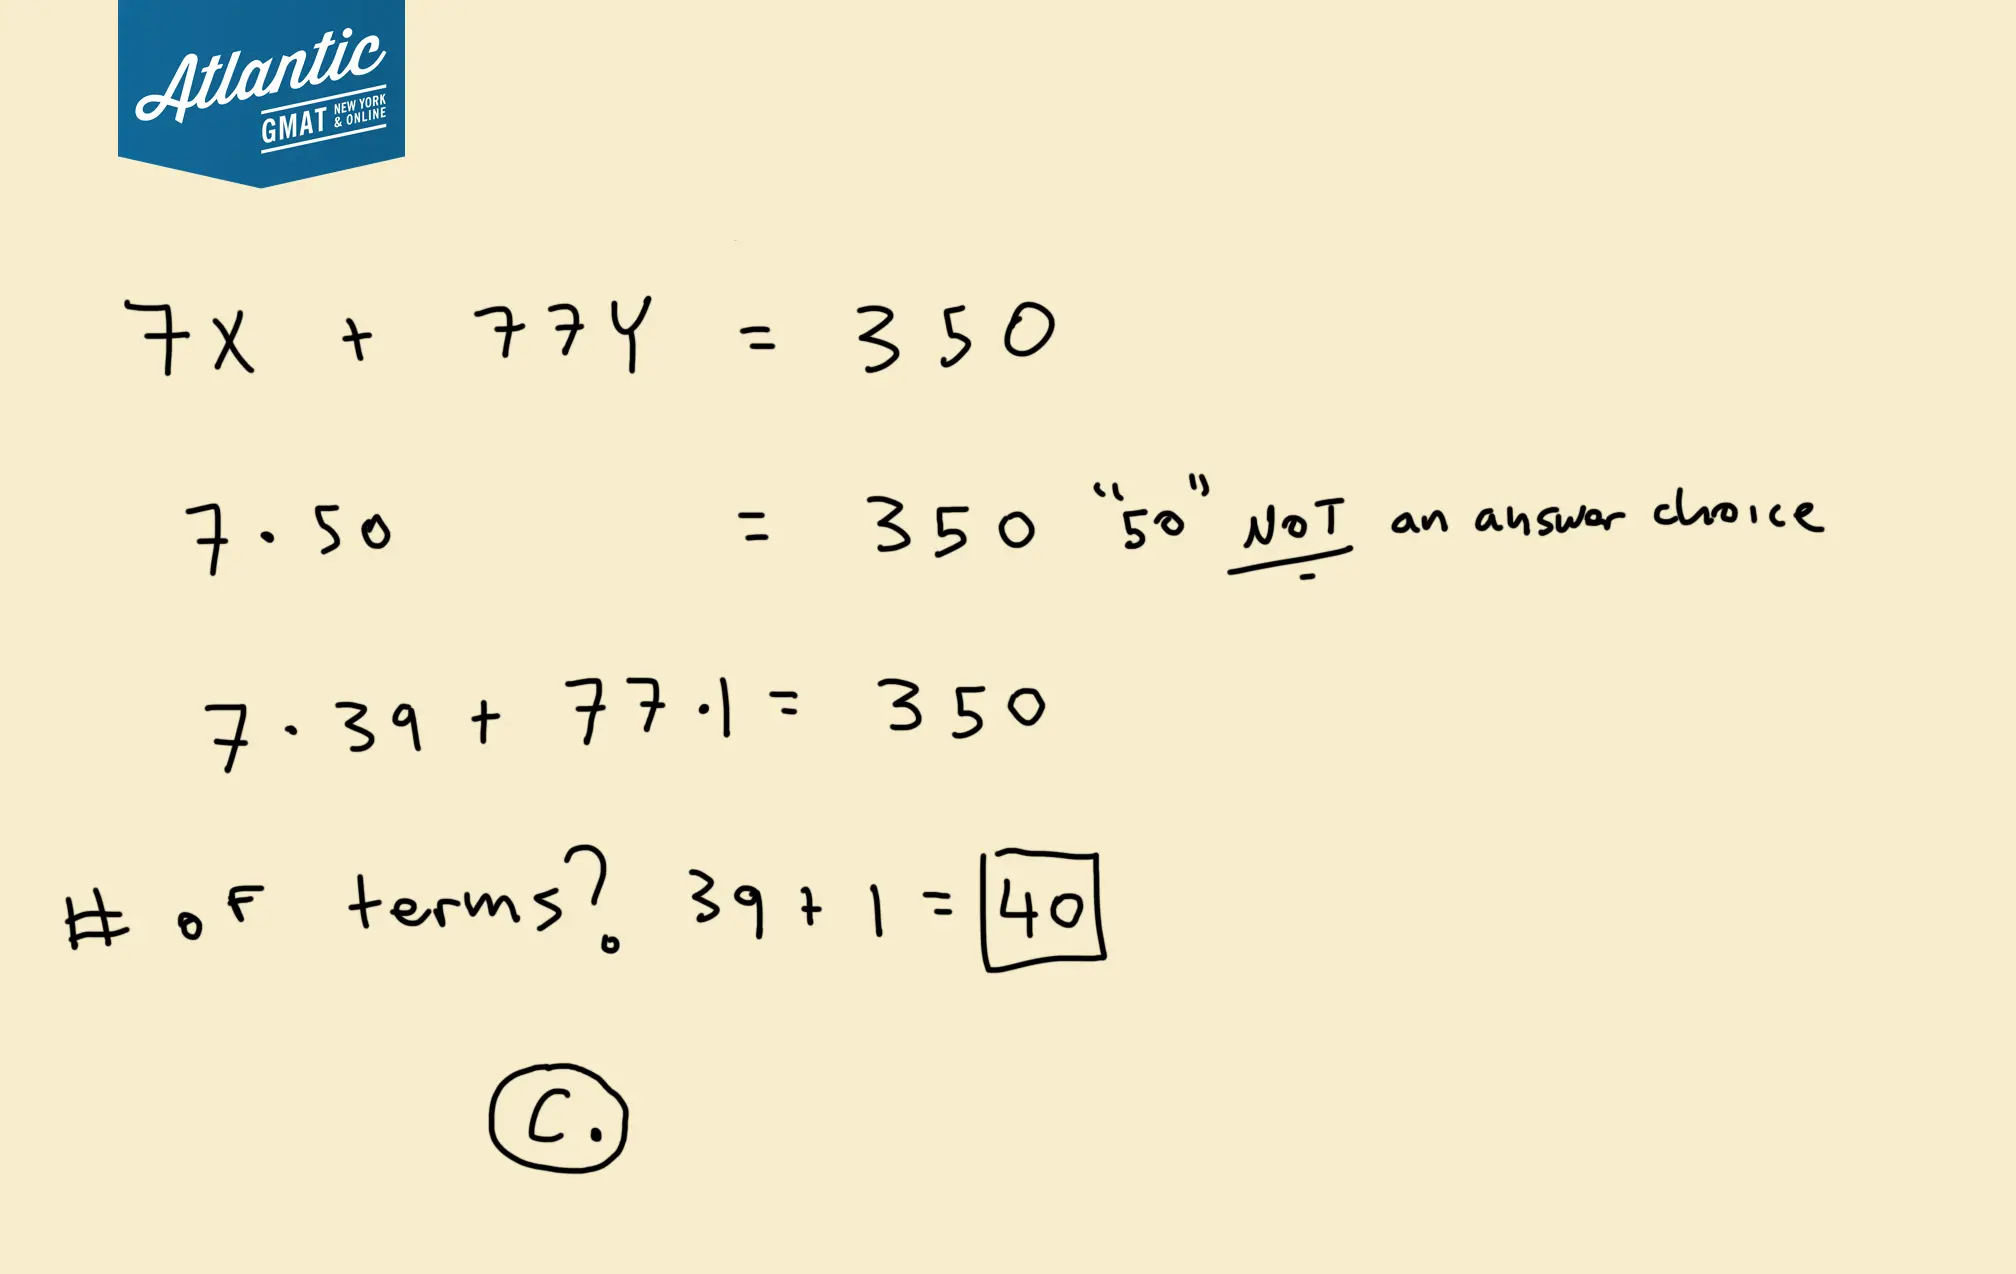 if each term in the sum a1 + a2 + a3 +...+ an is either 7 or 77 and the sum equals 350 solution